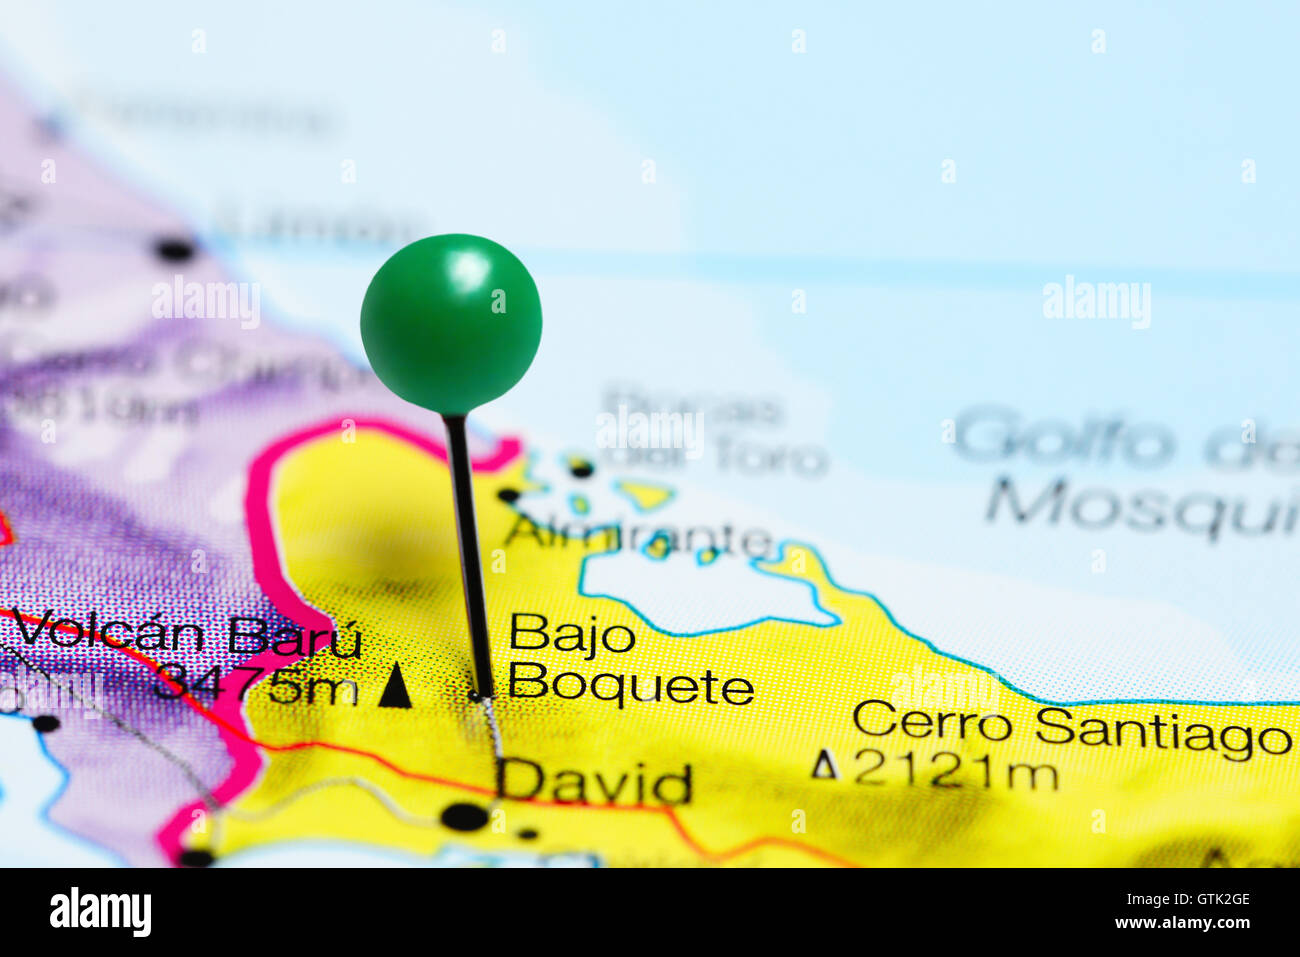 Bajo Boquete pinned on a map of Panama Stock Photo